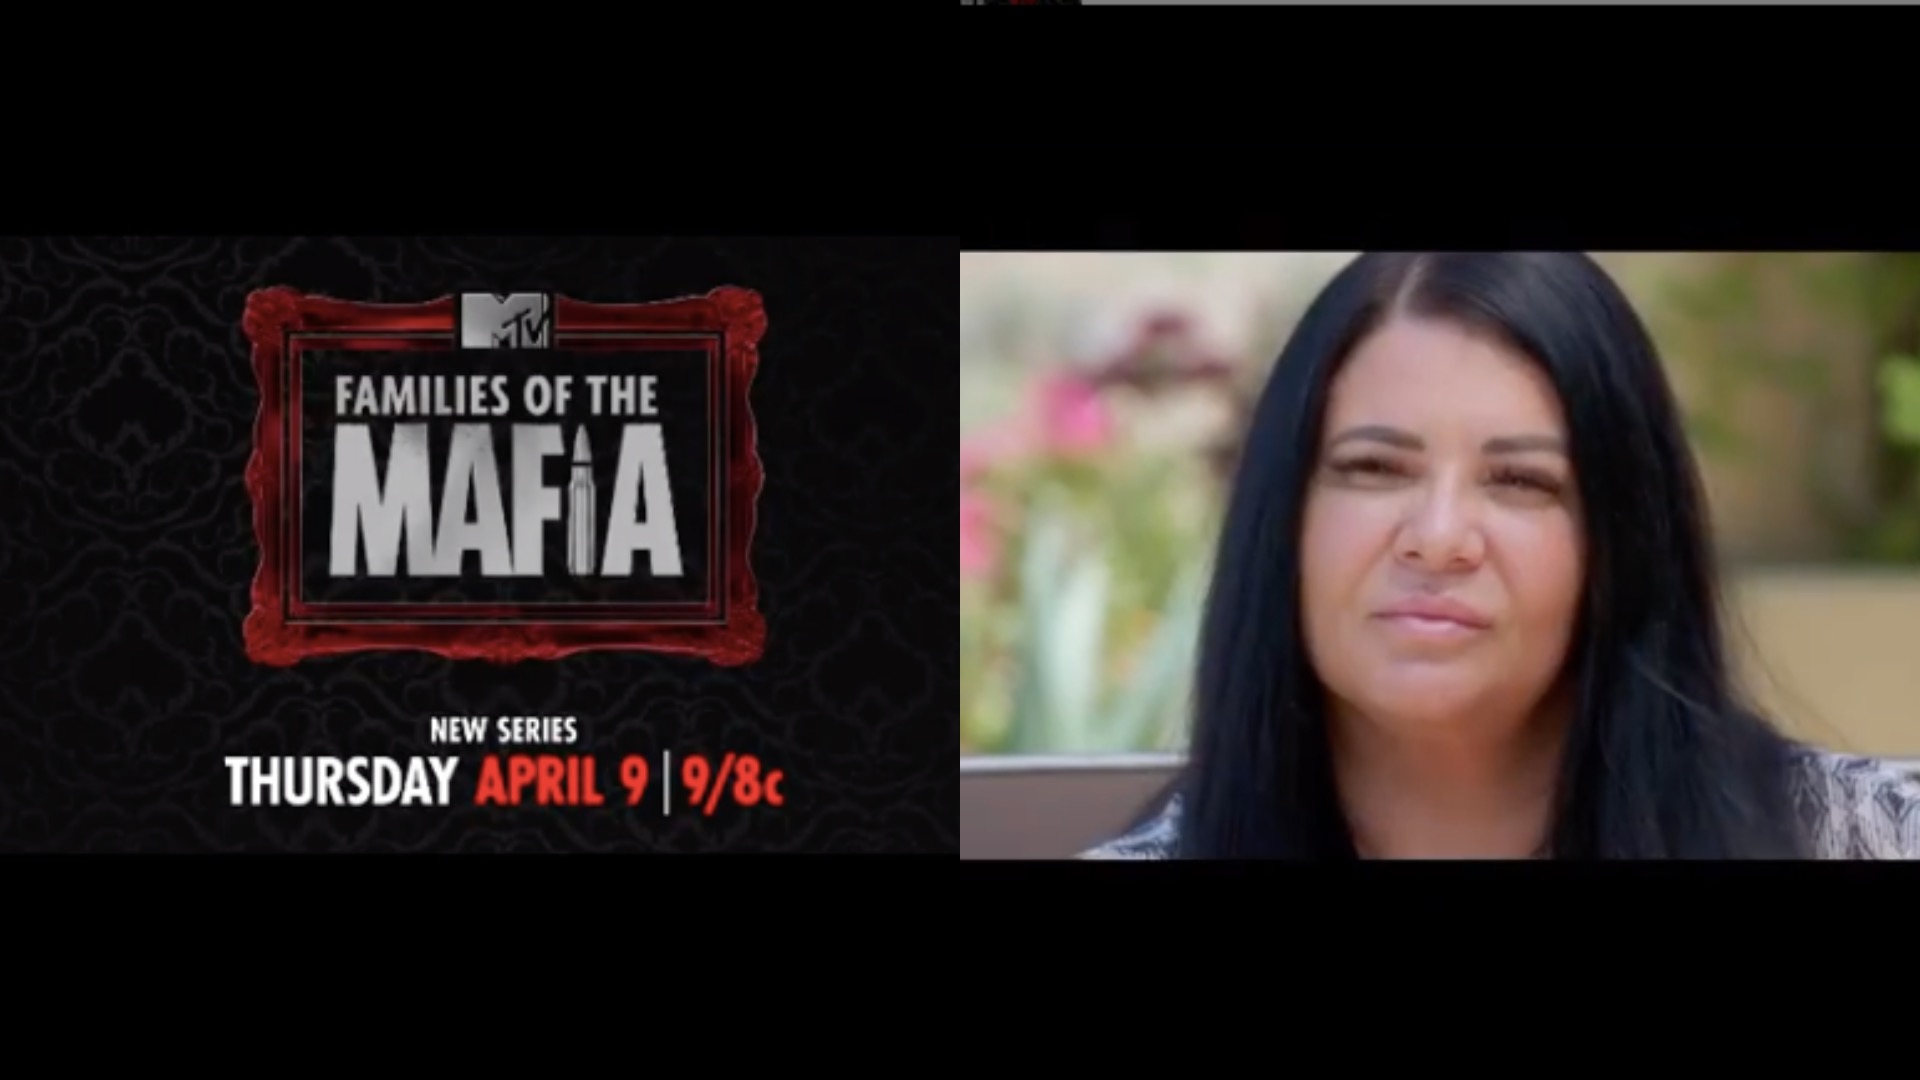 Mtv Drops Families Of The Mafia Trailer With Made In Staten Island Cast Docuseries Due In April Silive Com